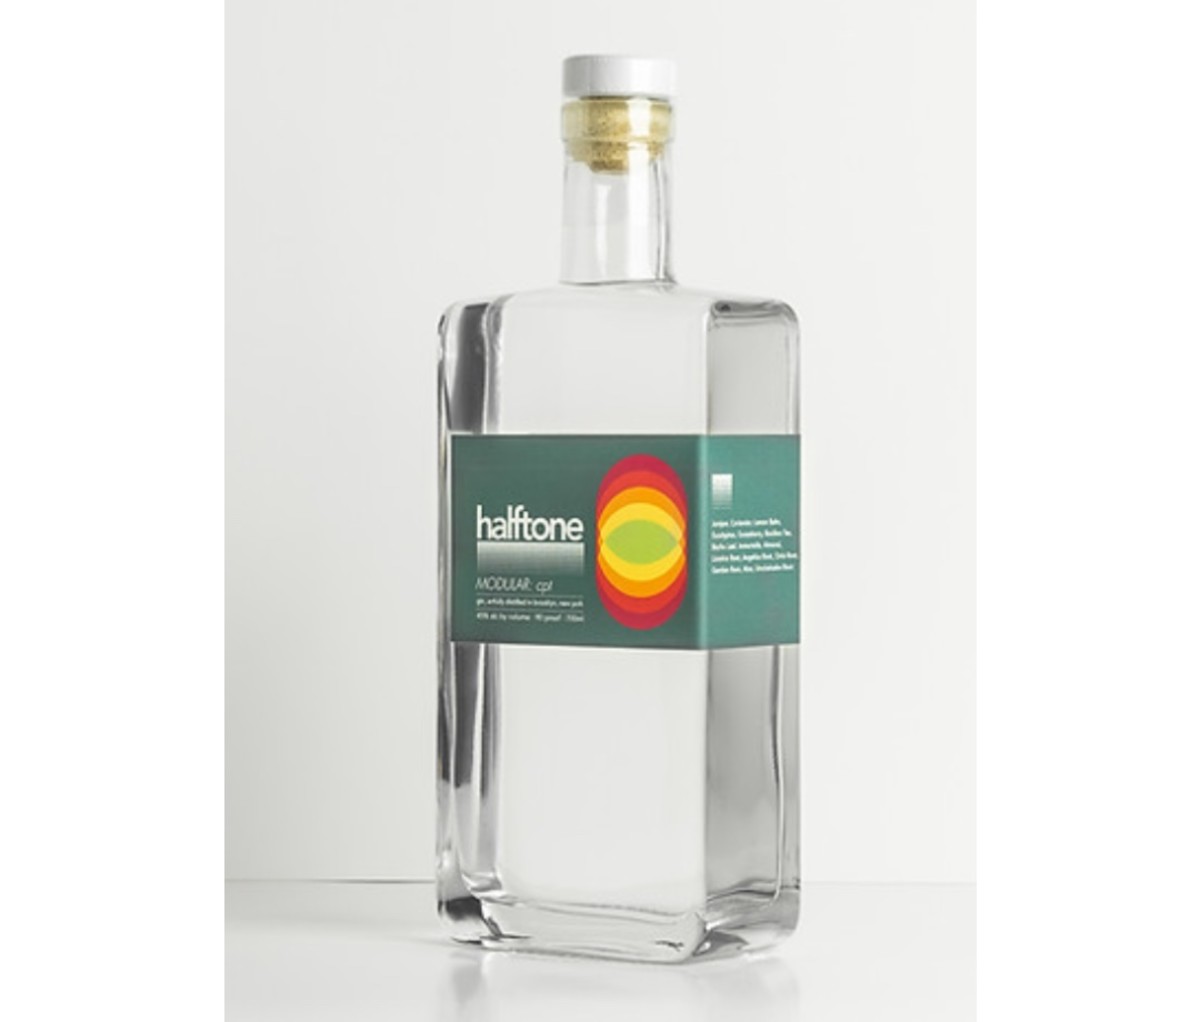 Rectangular, clear bottle of gin with a green label on an off-white background.